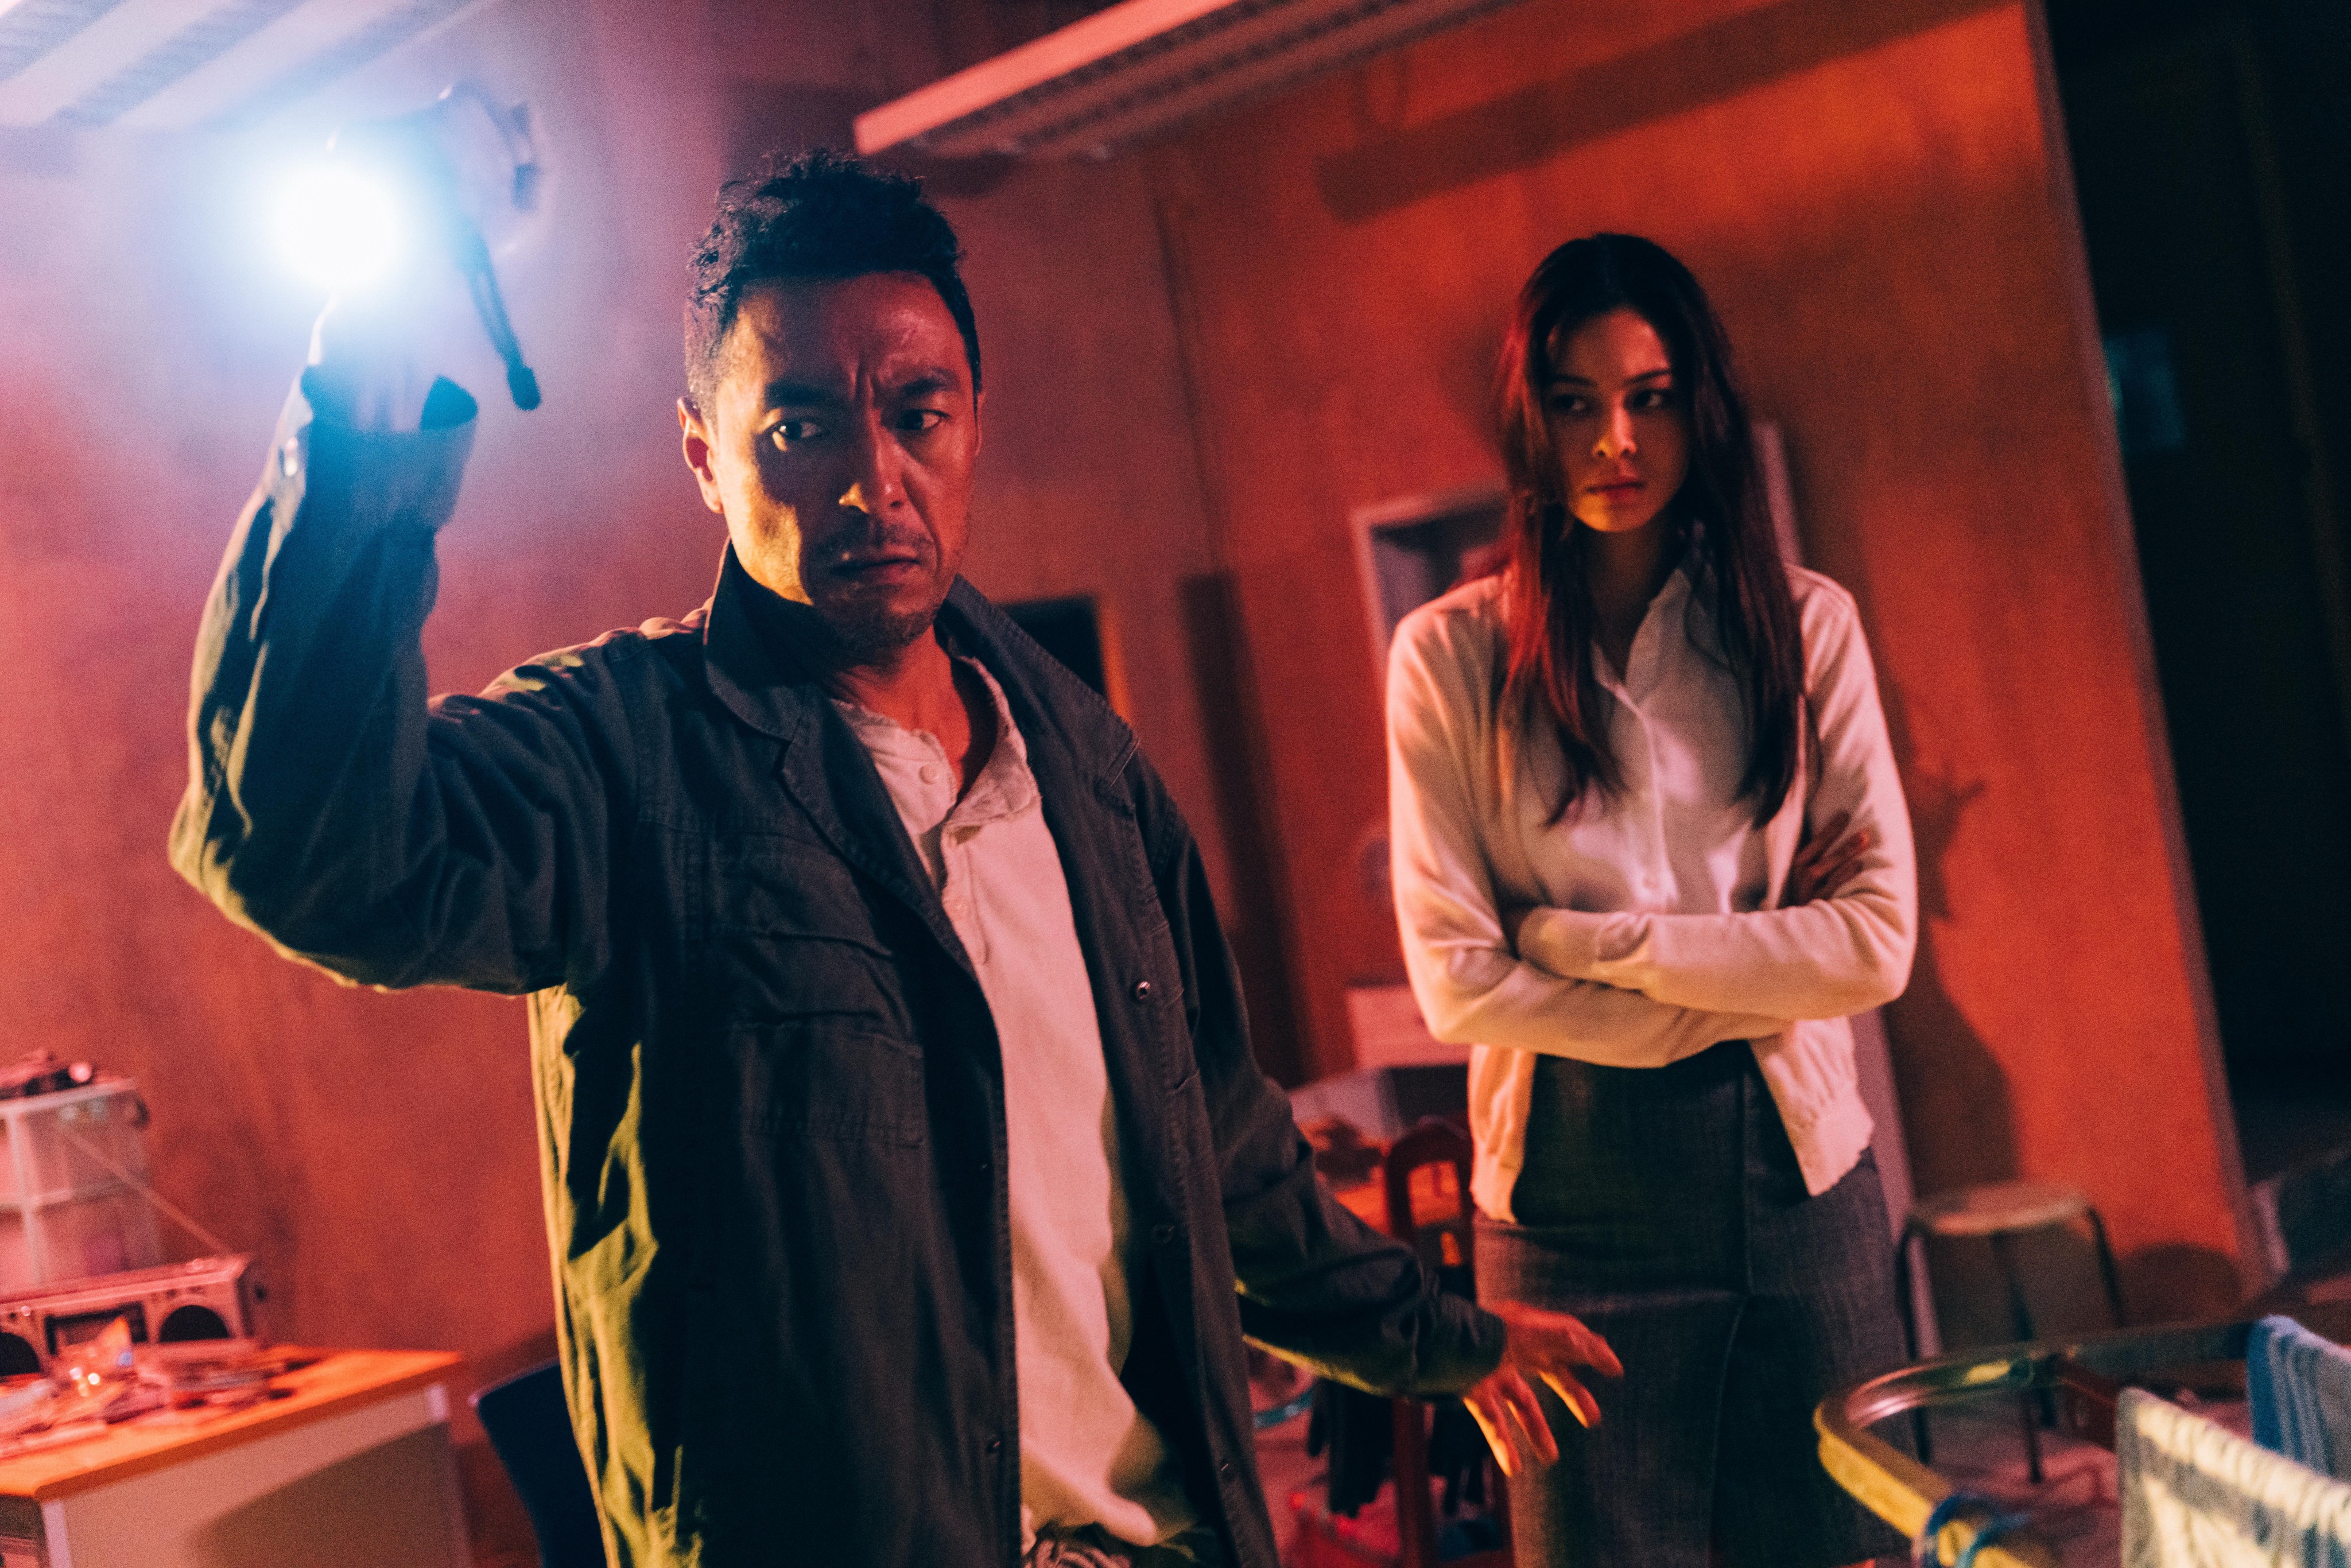 Philip Keung (left) and Amy Lo in a still from “No Way Out”, one of three short films in the horror anthology “Tales from the Occult: Ultimate Malevolence”.